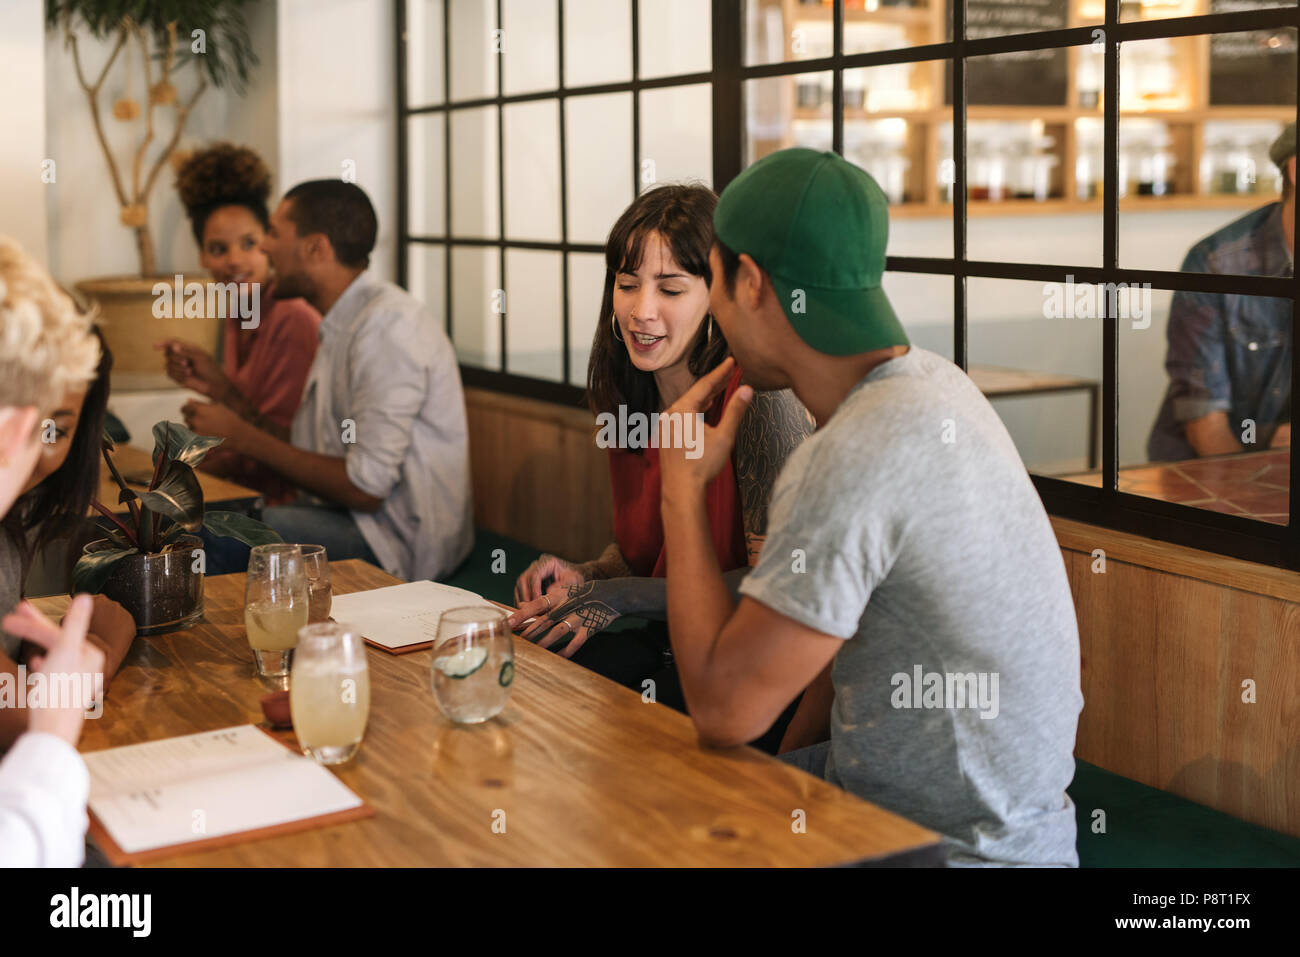 Smiling friends sitting and talking together at a bistro table Stock Photo